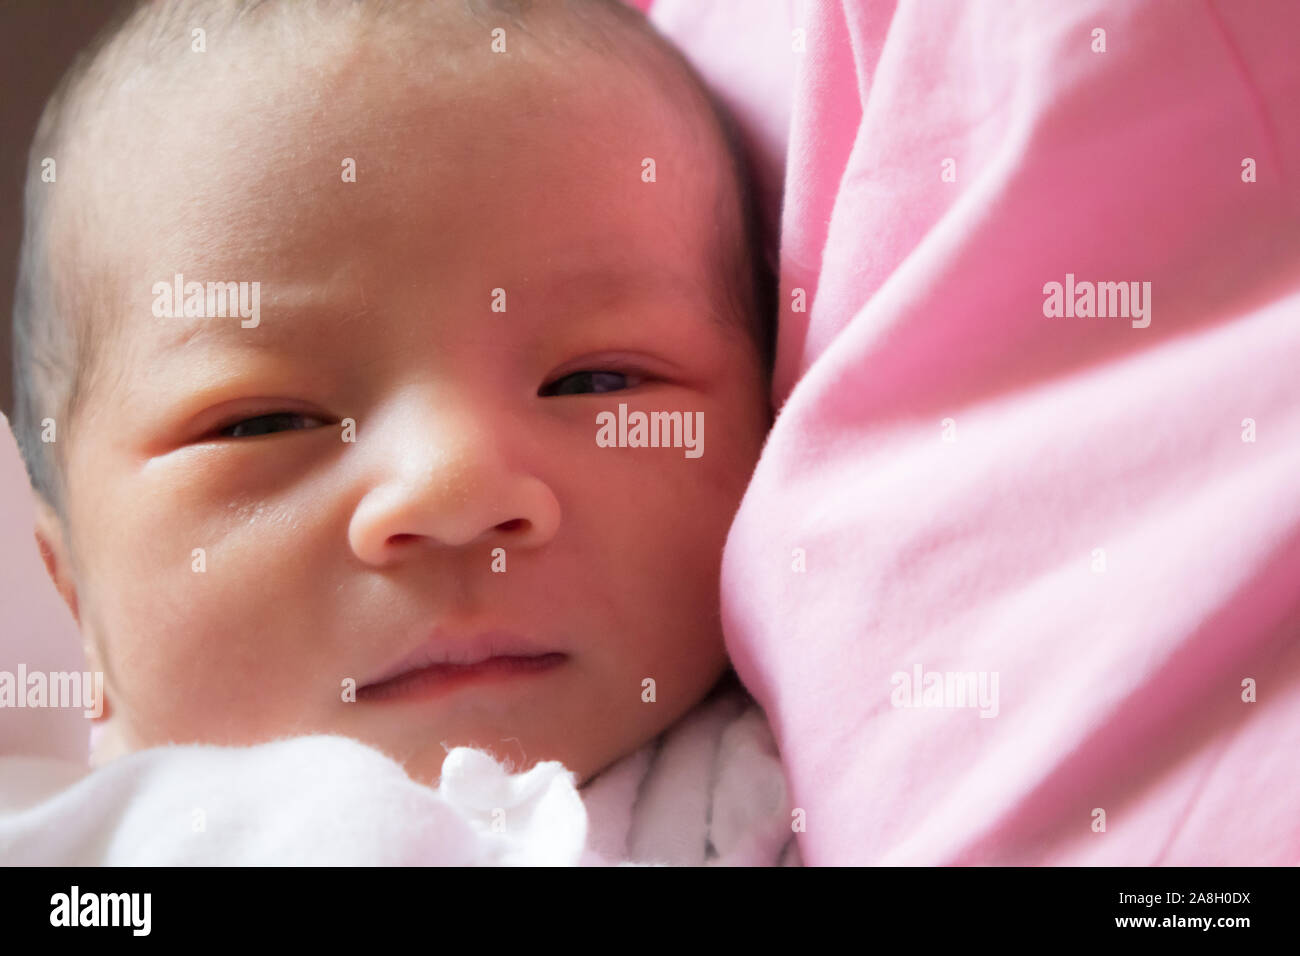 Close up and selective focus of one day old baby Stock Photo